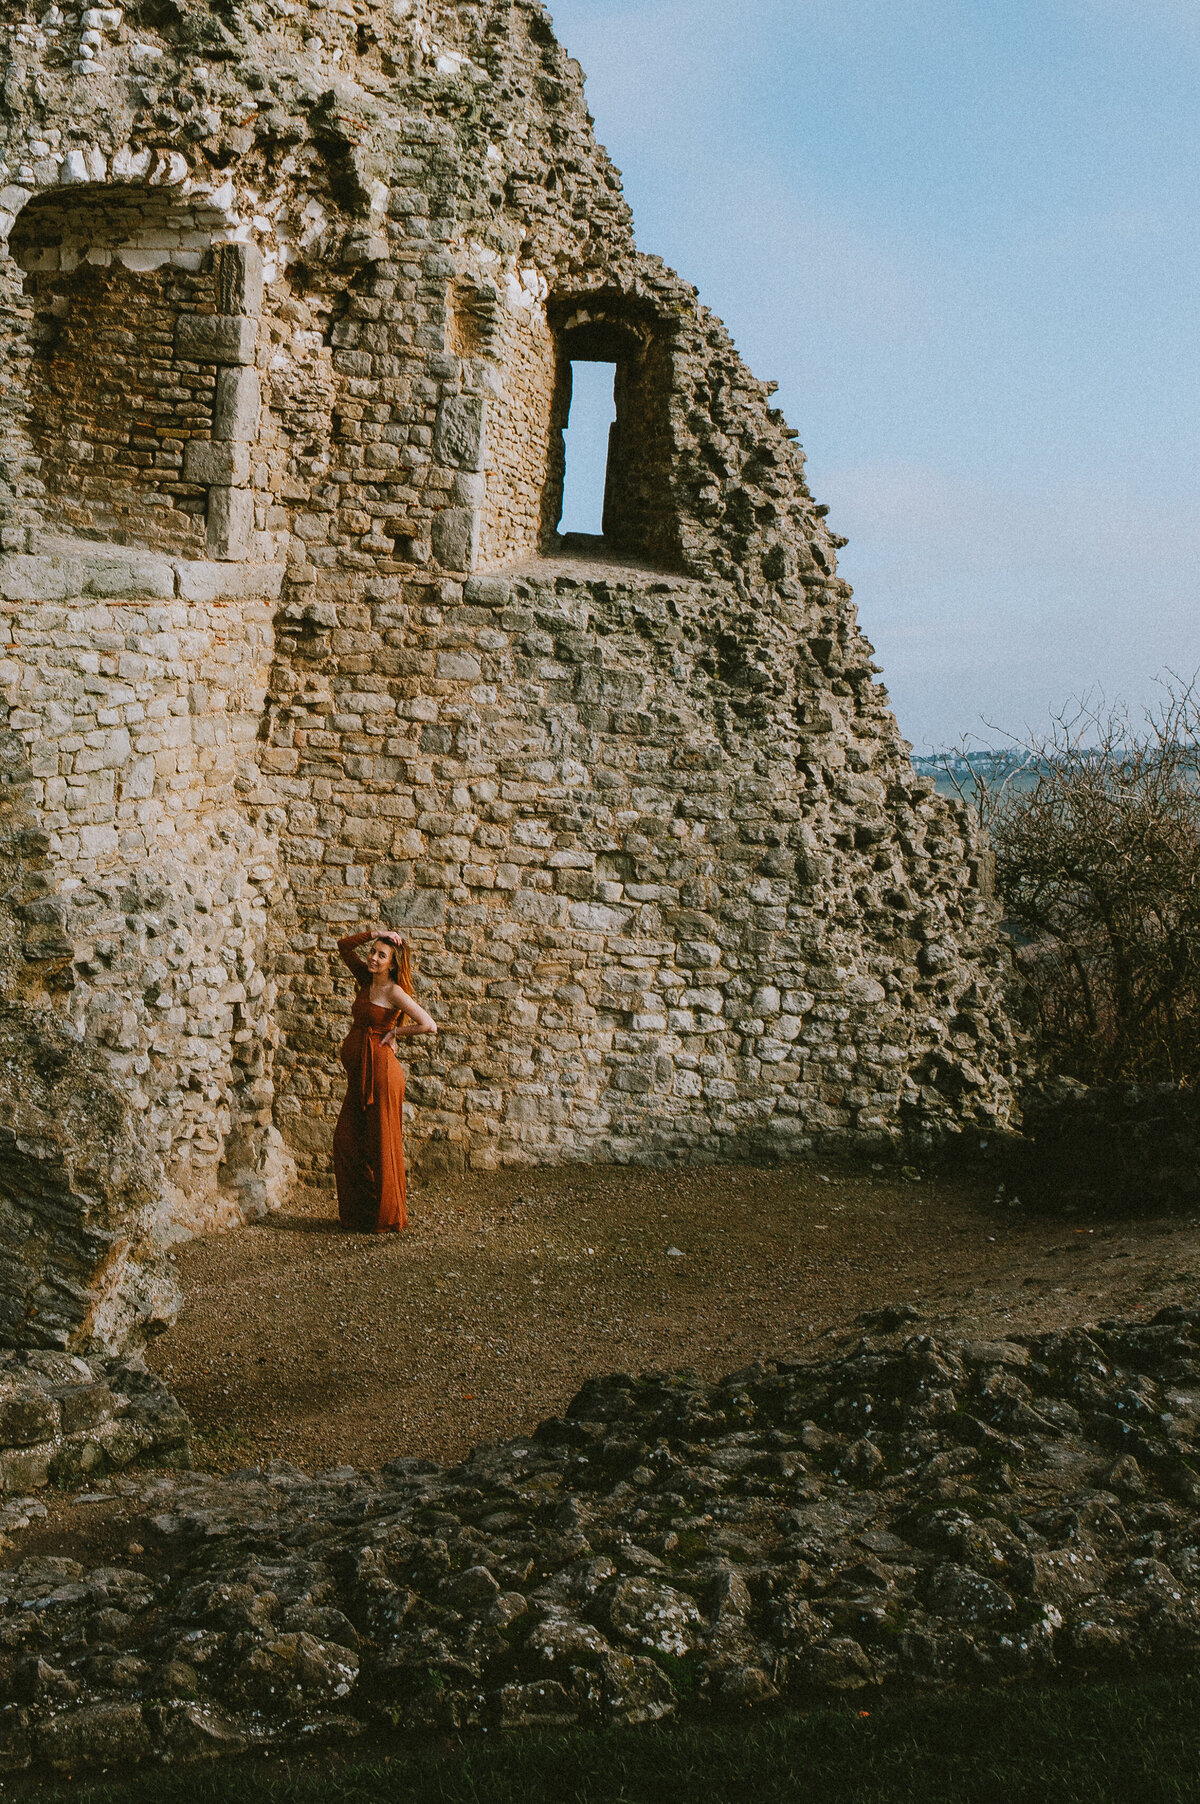 Hadleigh Castle, amazing location for this Maternity shoot